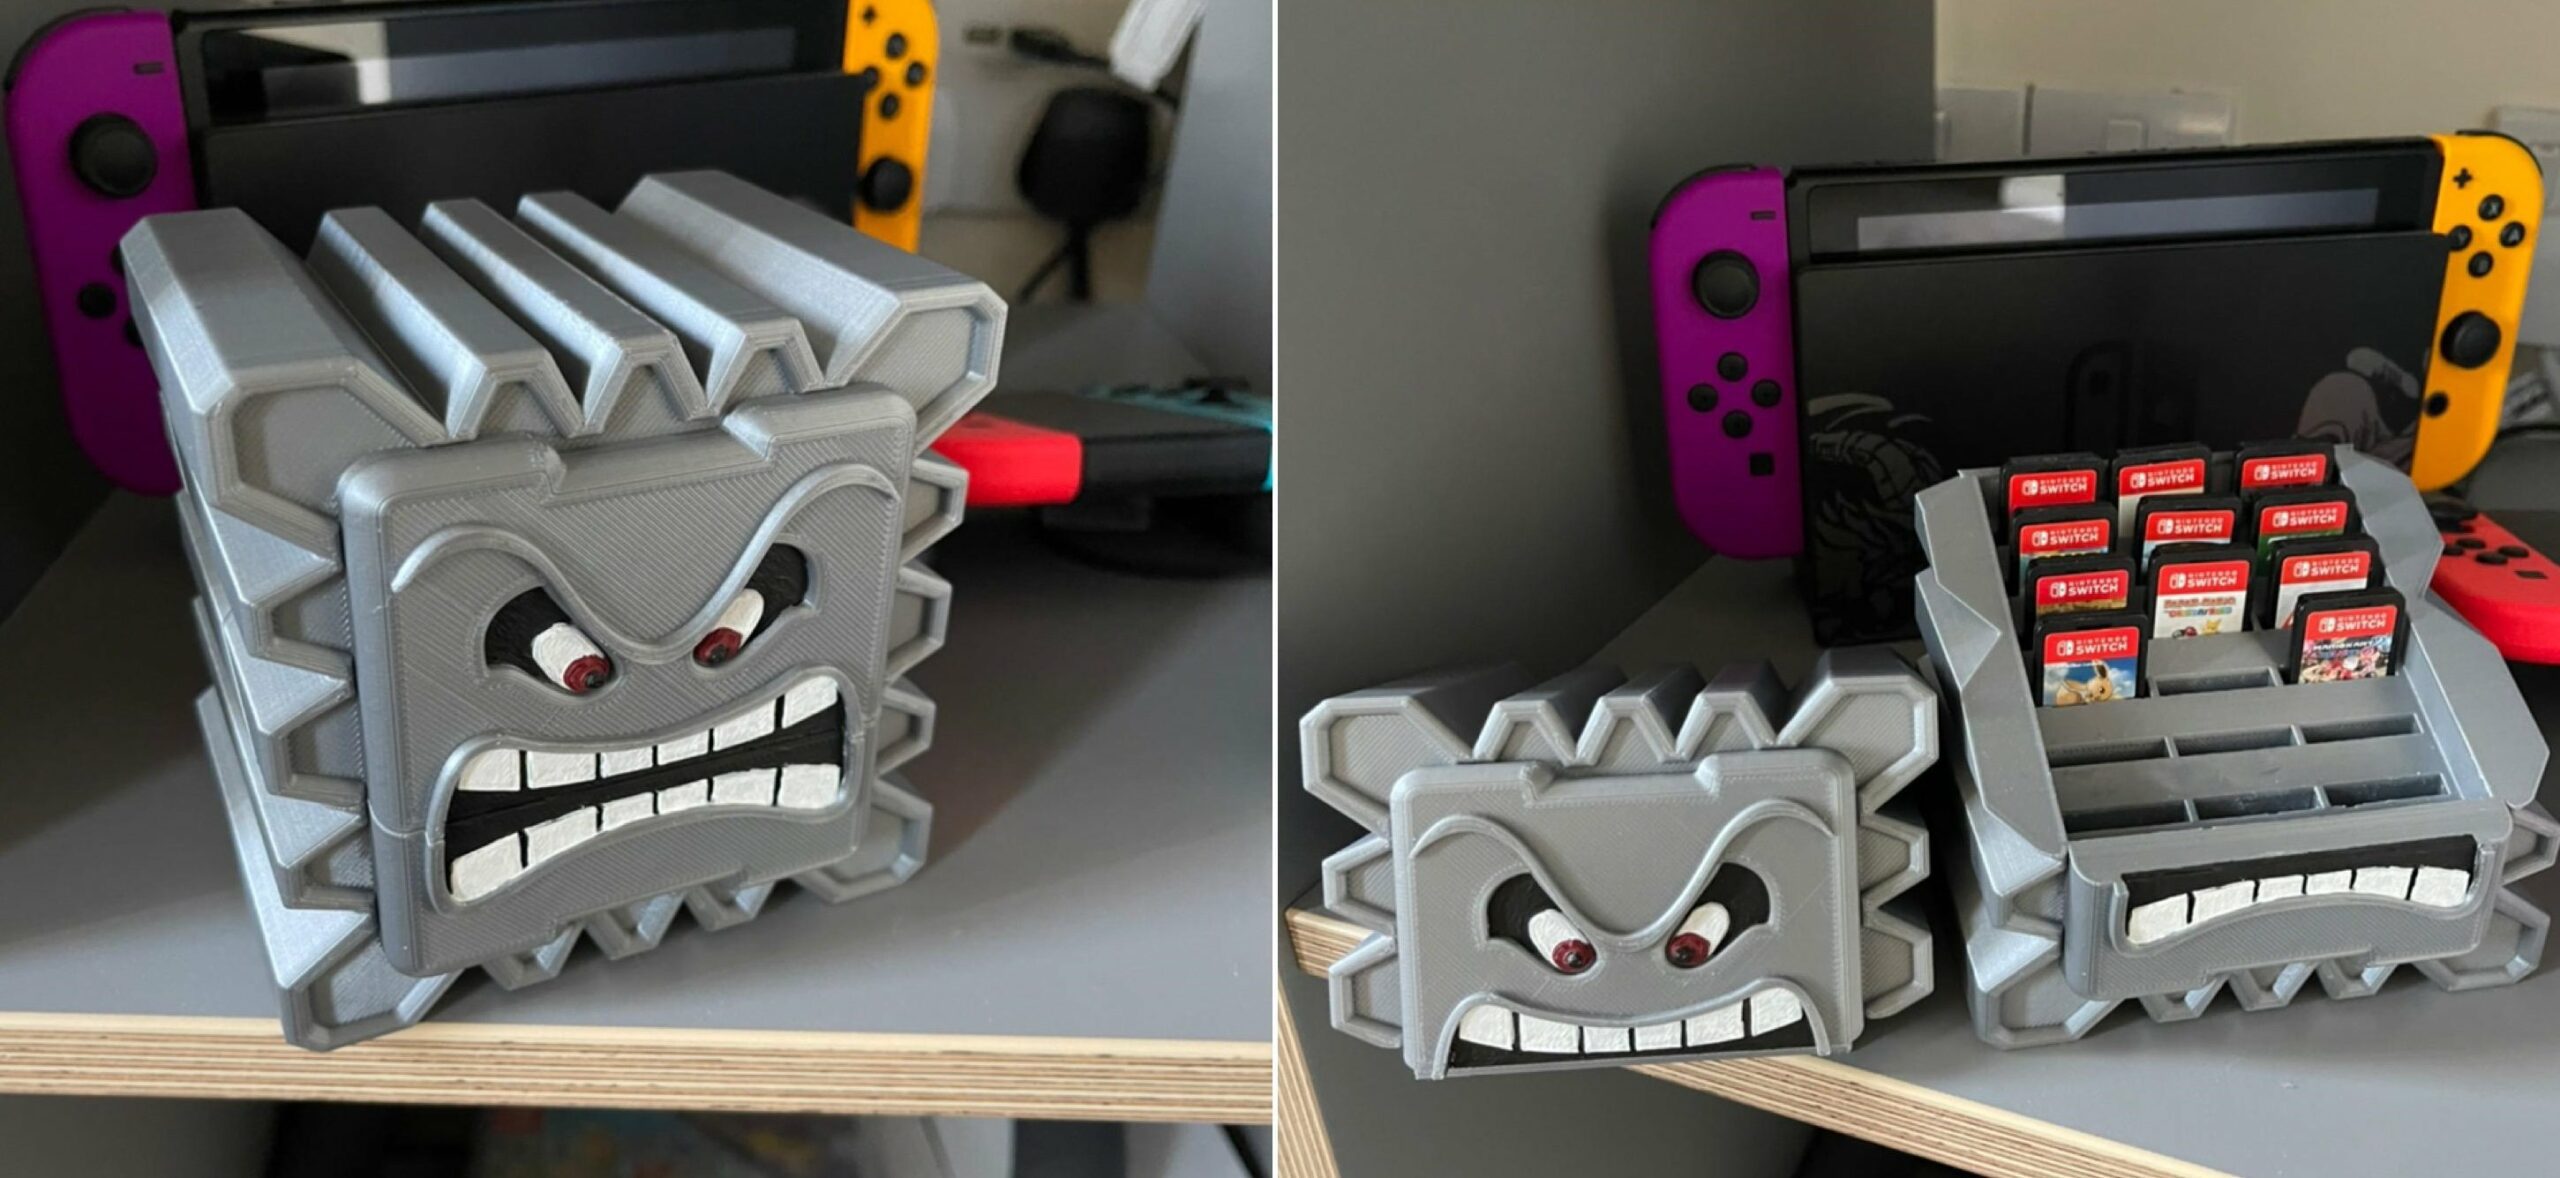 This 3D-printed Switch cartridge holder is the of dreams – Destructoid